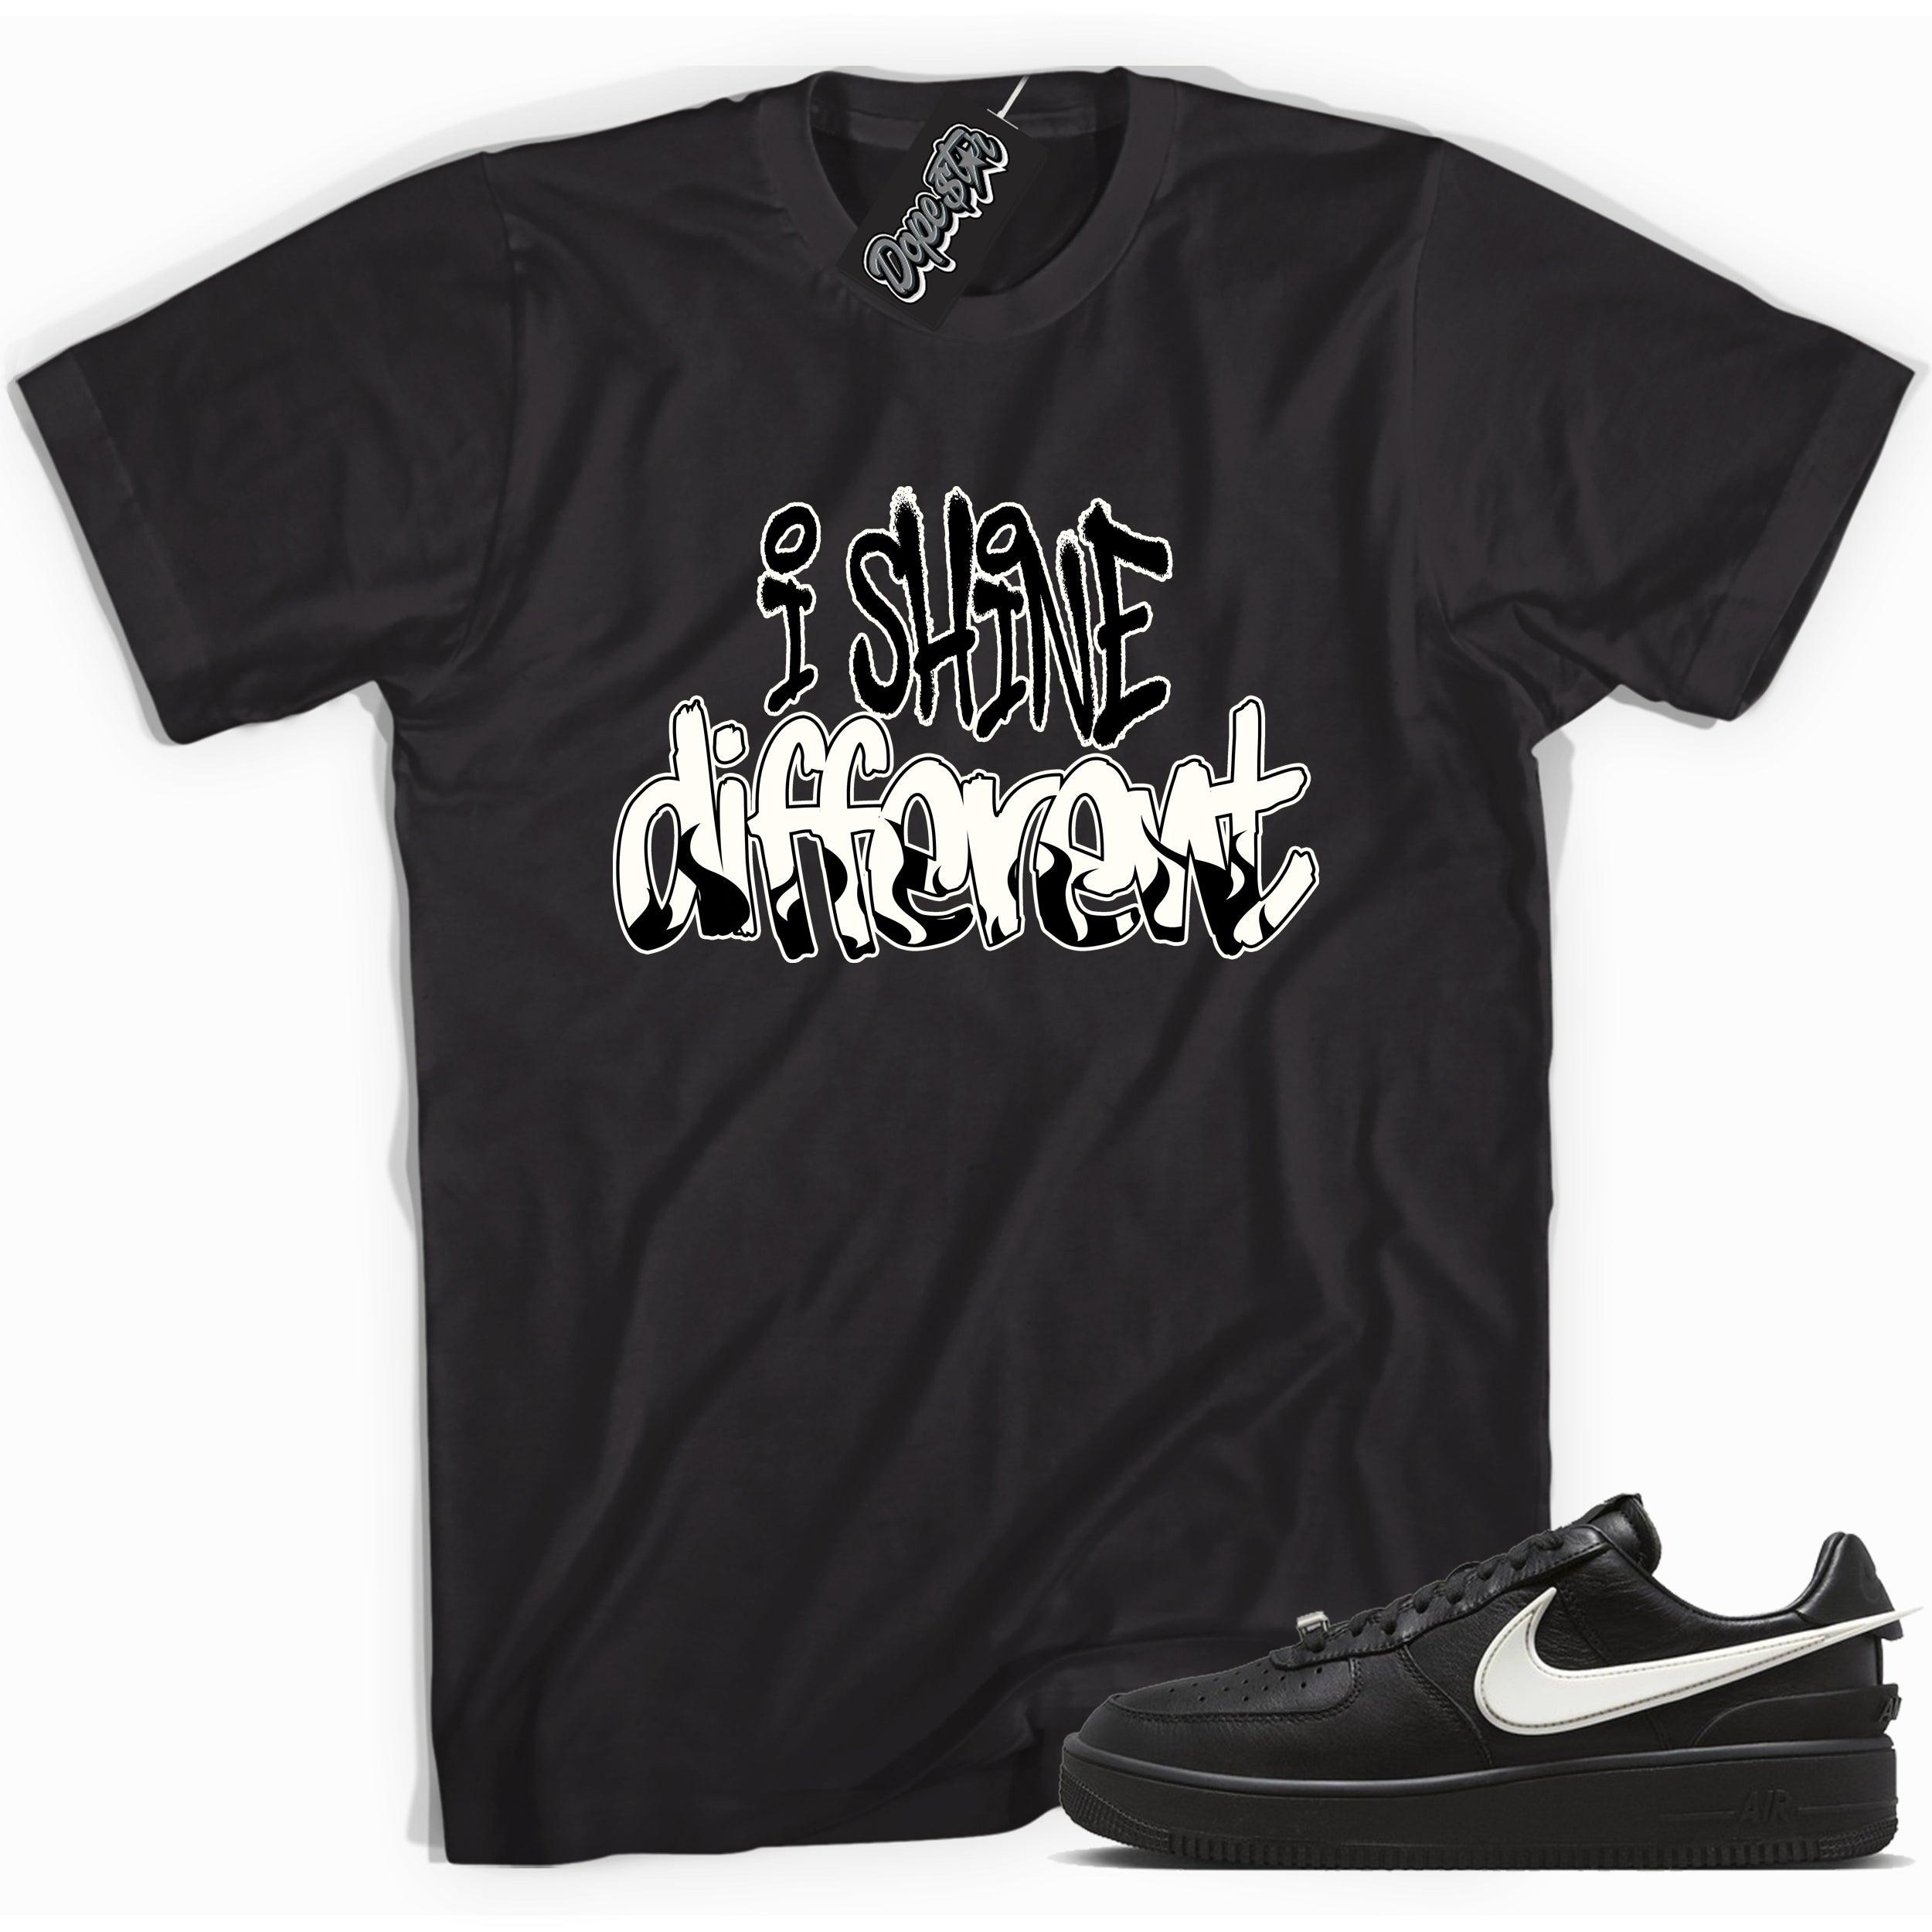 Cool black graphic tee with 'i shine different' print, that perfectly matches Nike Air Force 1 Low Ambush Phantom Black sneakers